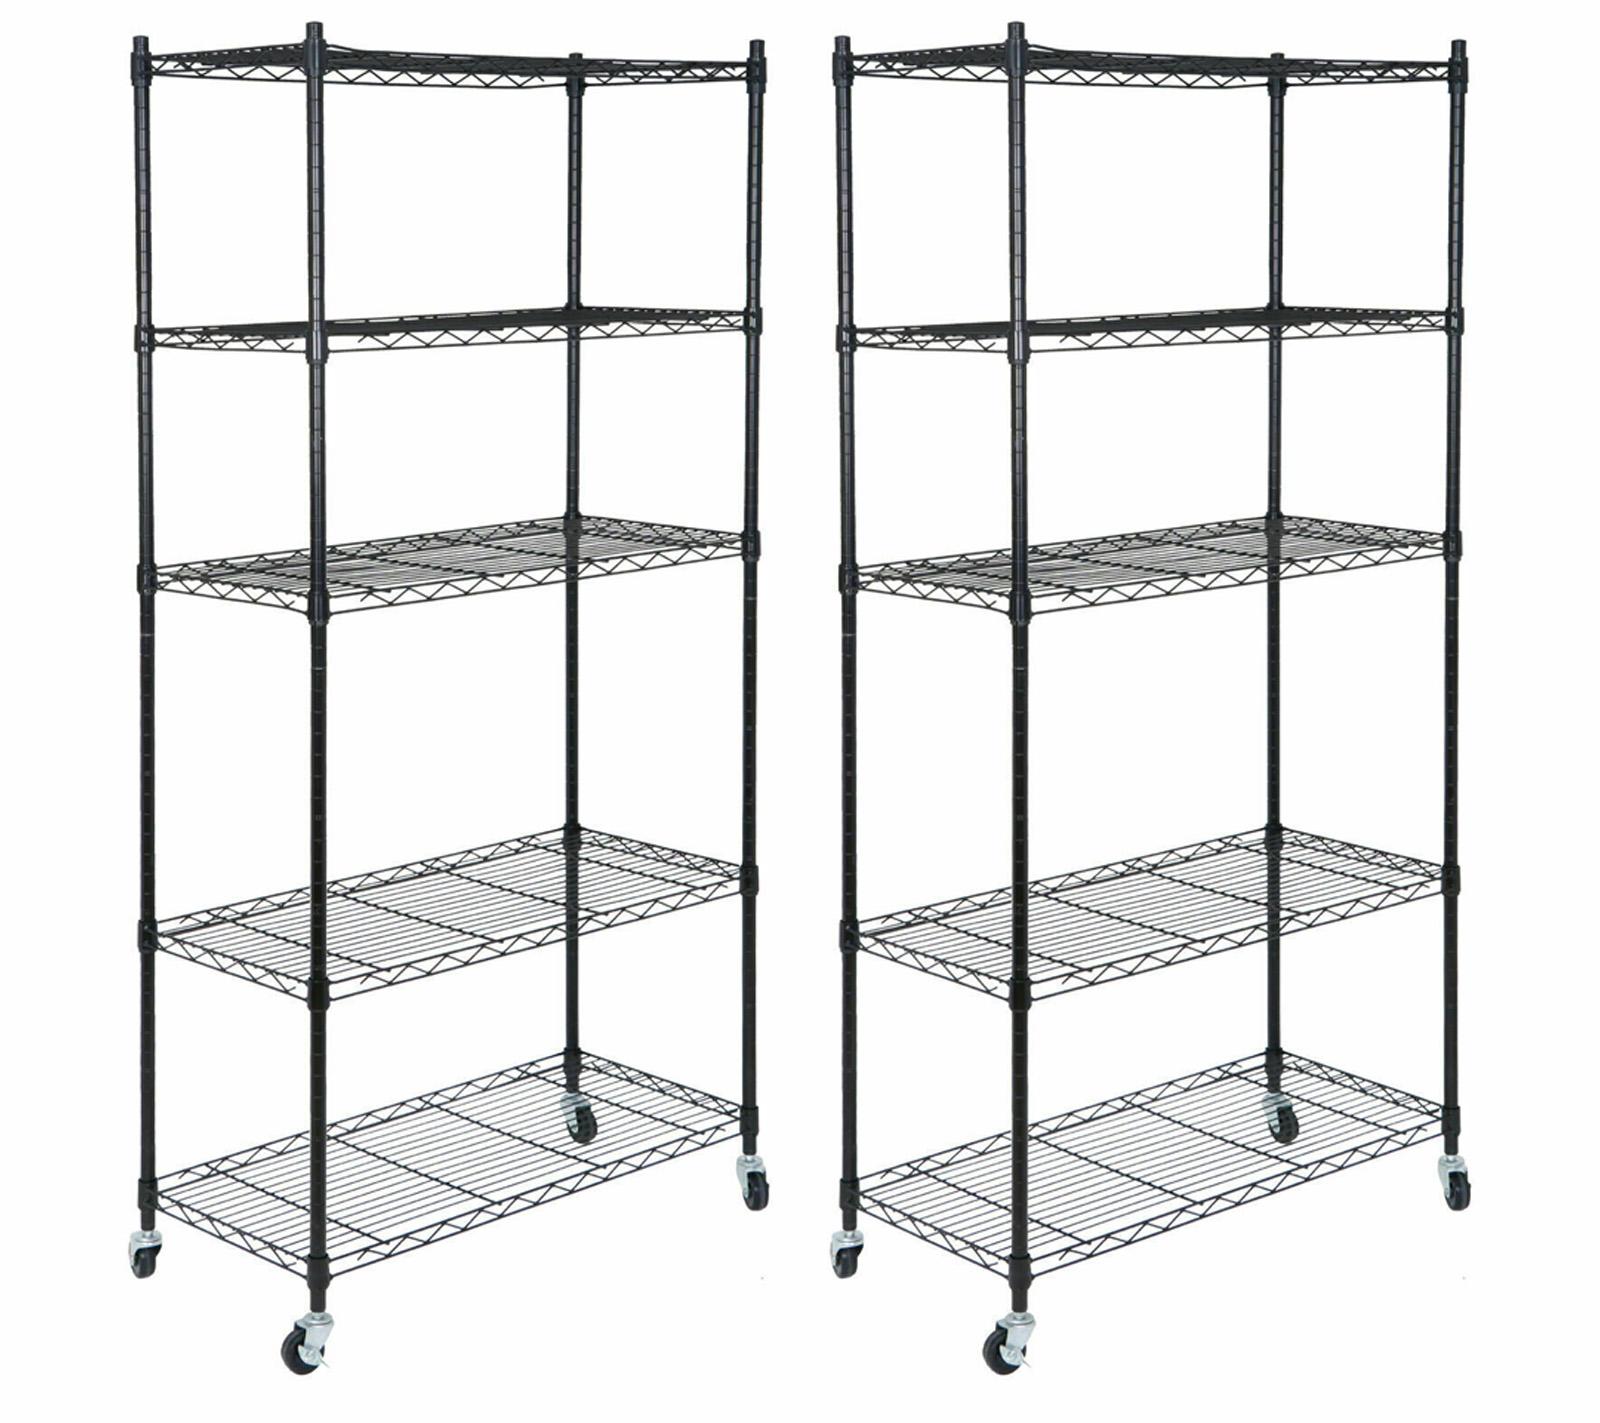 5-Tier Shelves Wire Unit Rack Large Space Storage Rolling 2 Pack for $77.02 Shipped